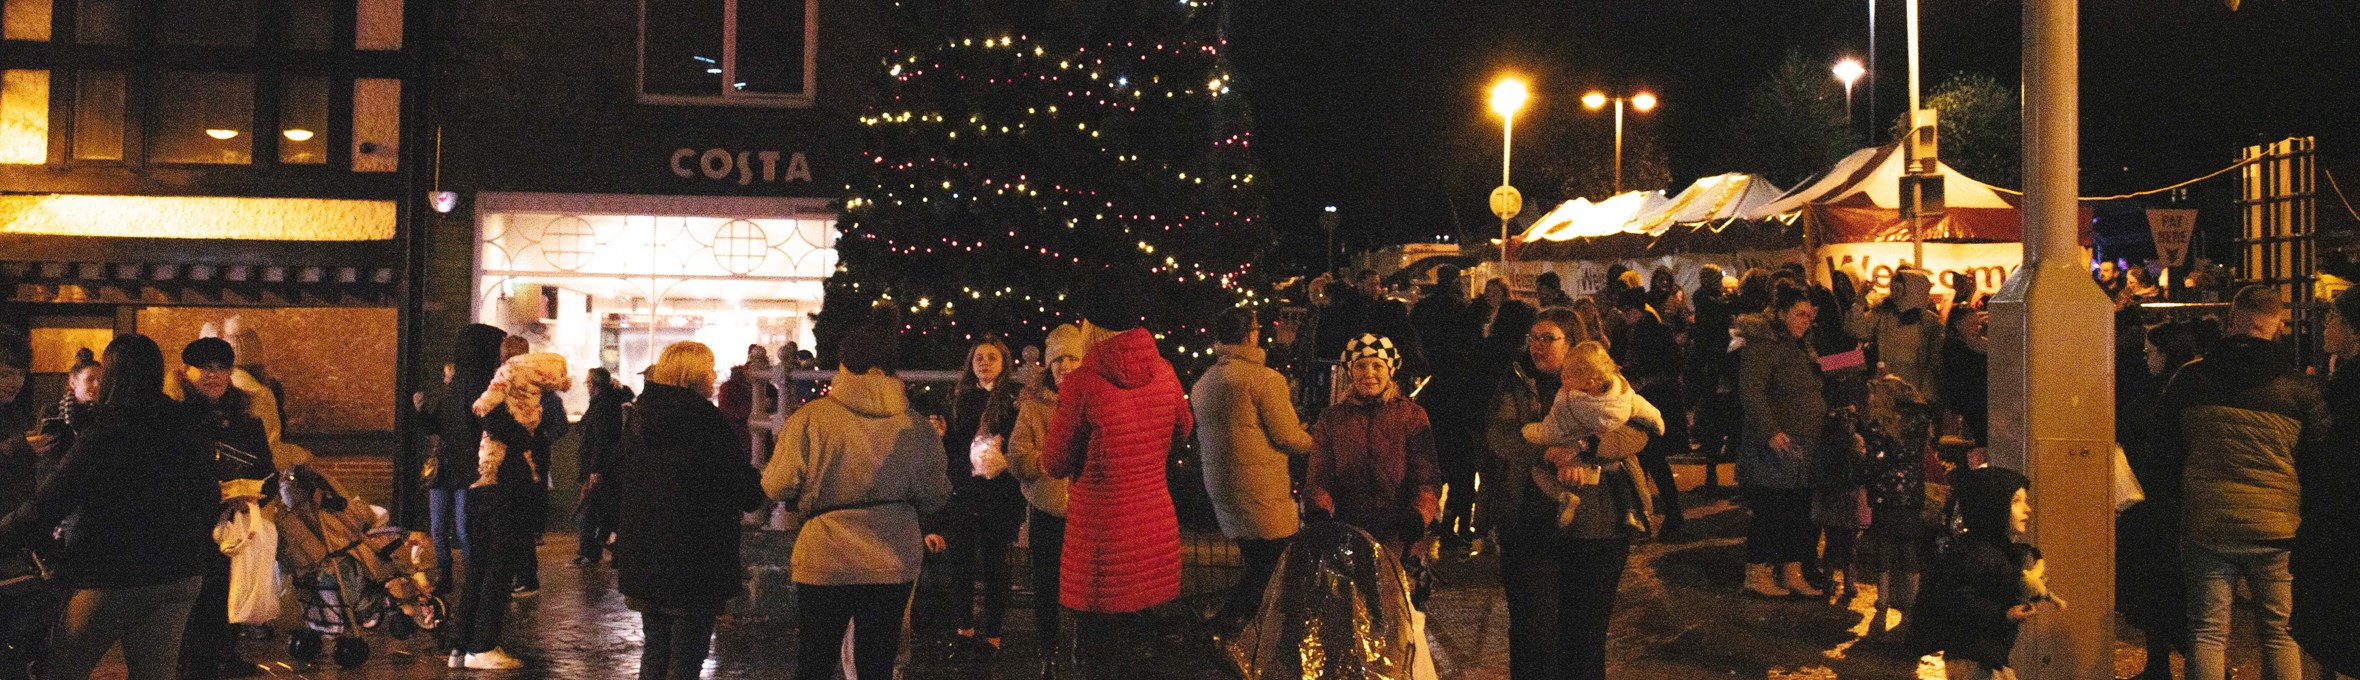 Crowds of people in front of a big Christmas tree with market stalls in the background